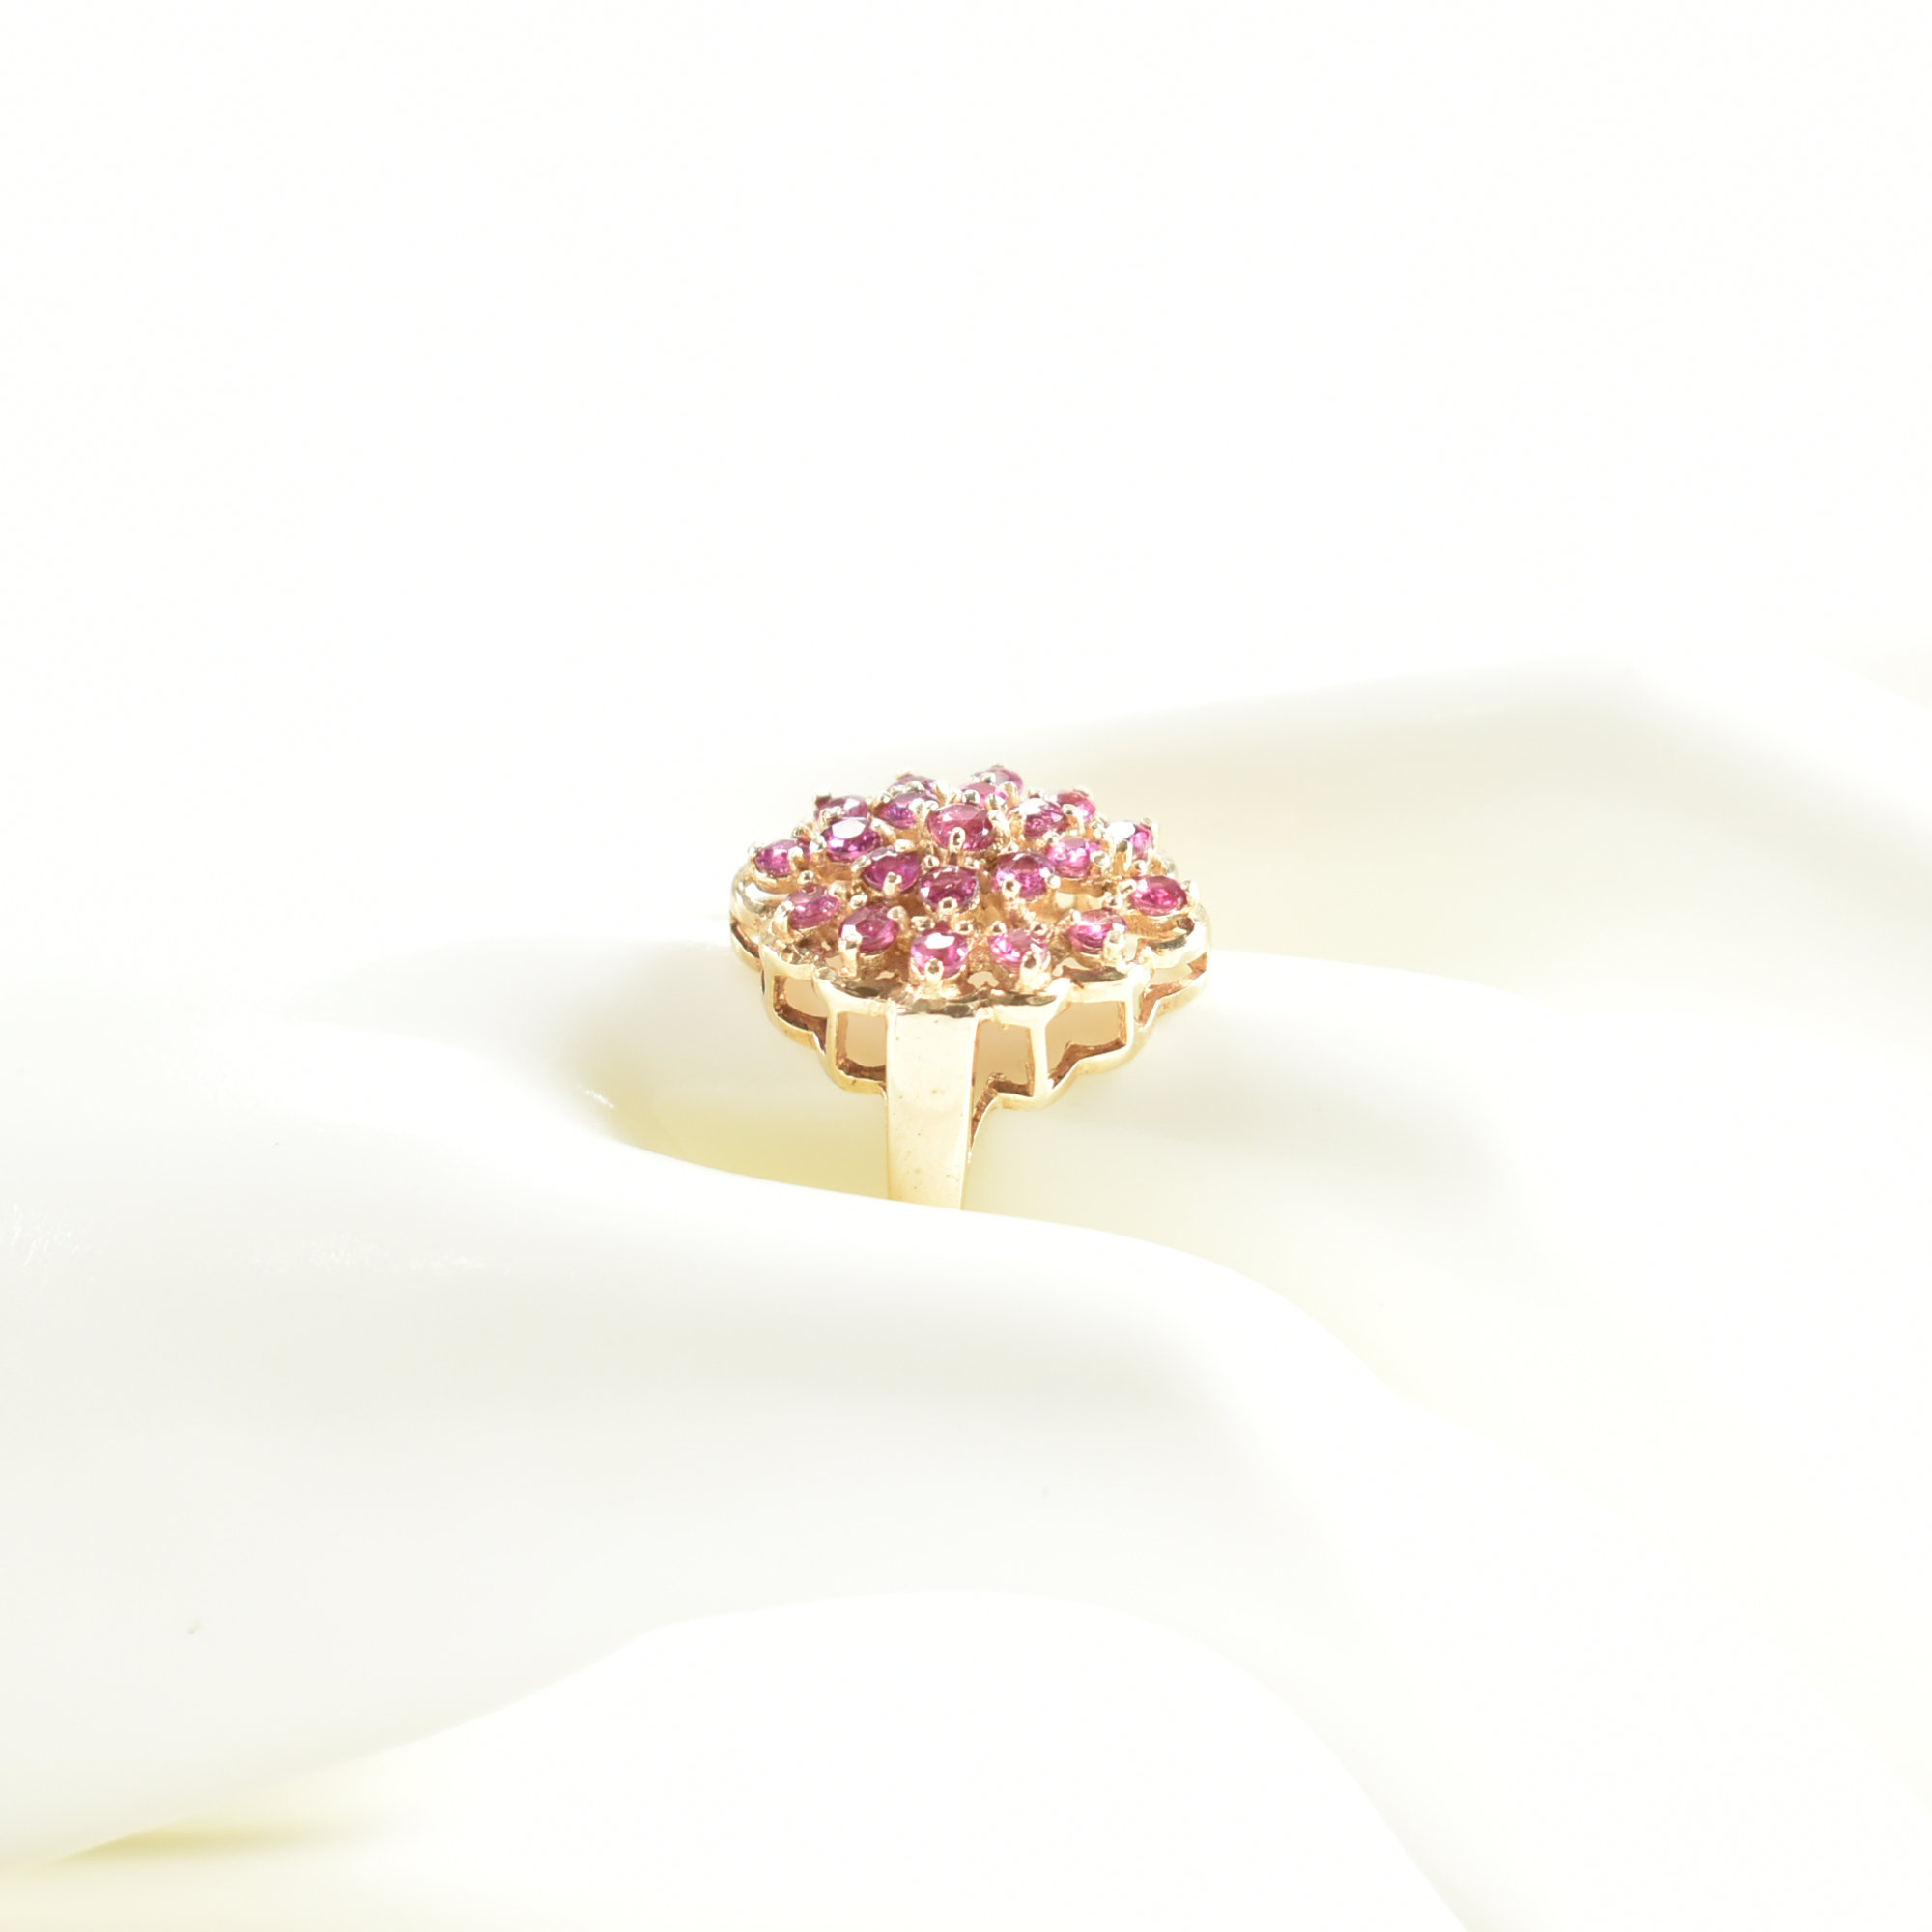 HALLMARKED 9CT GOLD & RED STONE CLUSTER RING - Image 9 of 9